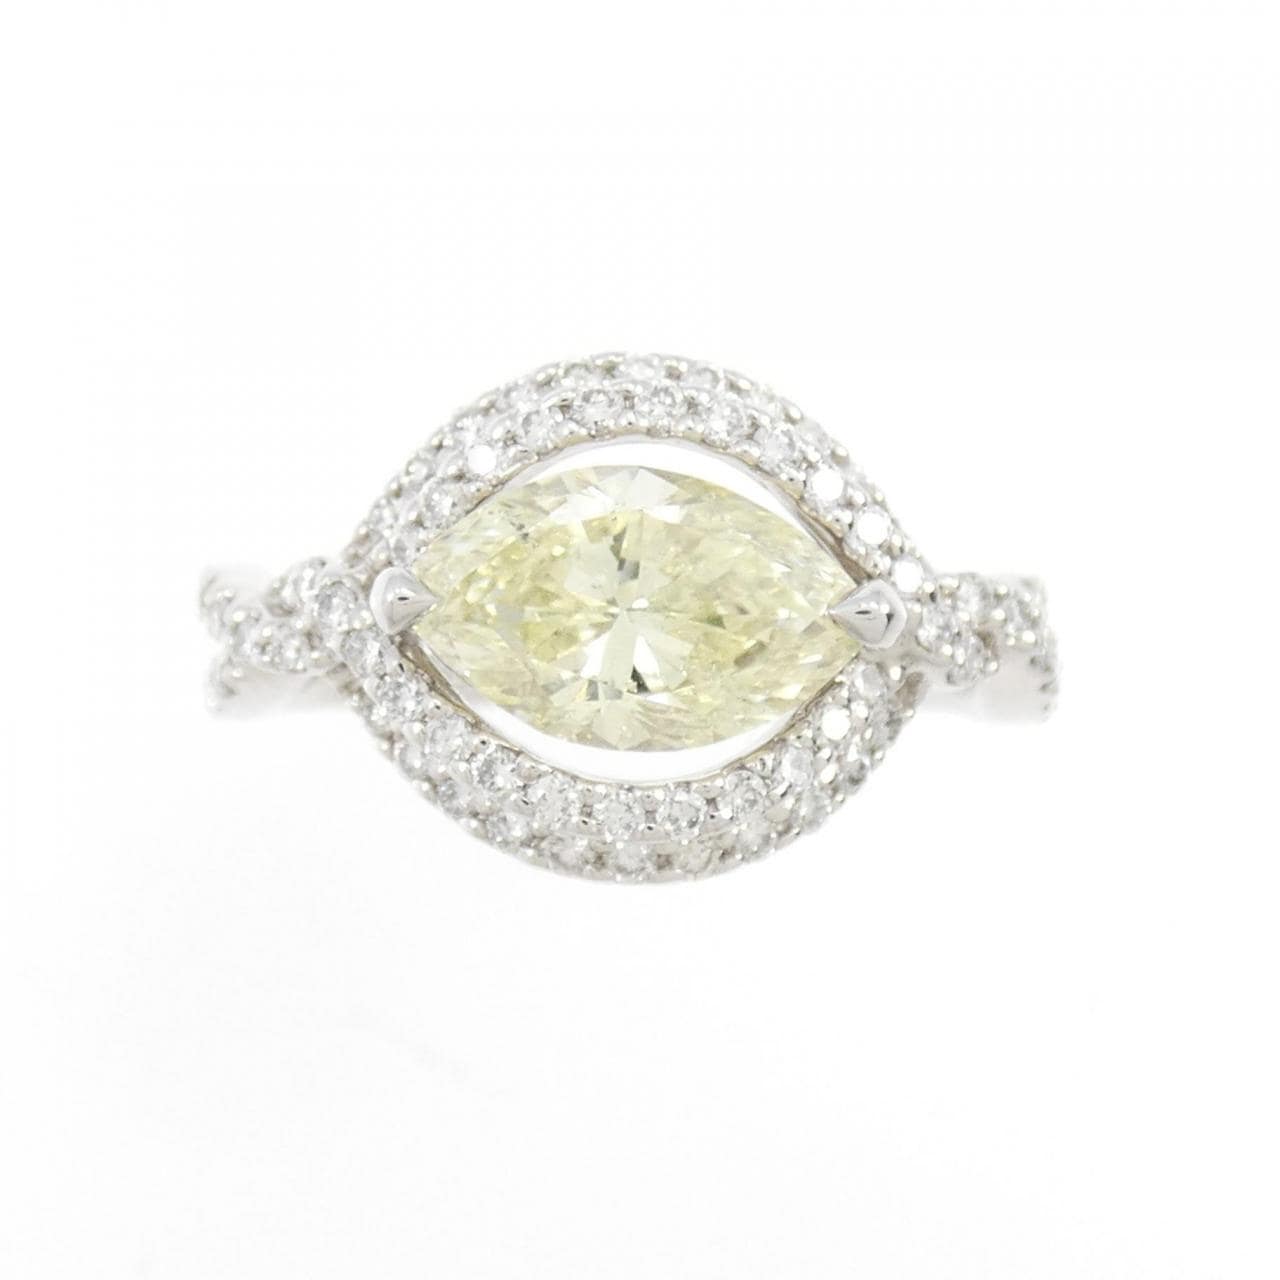 PT Diamond Ring 1.509CT VLY SI2 Marquise Cut